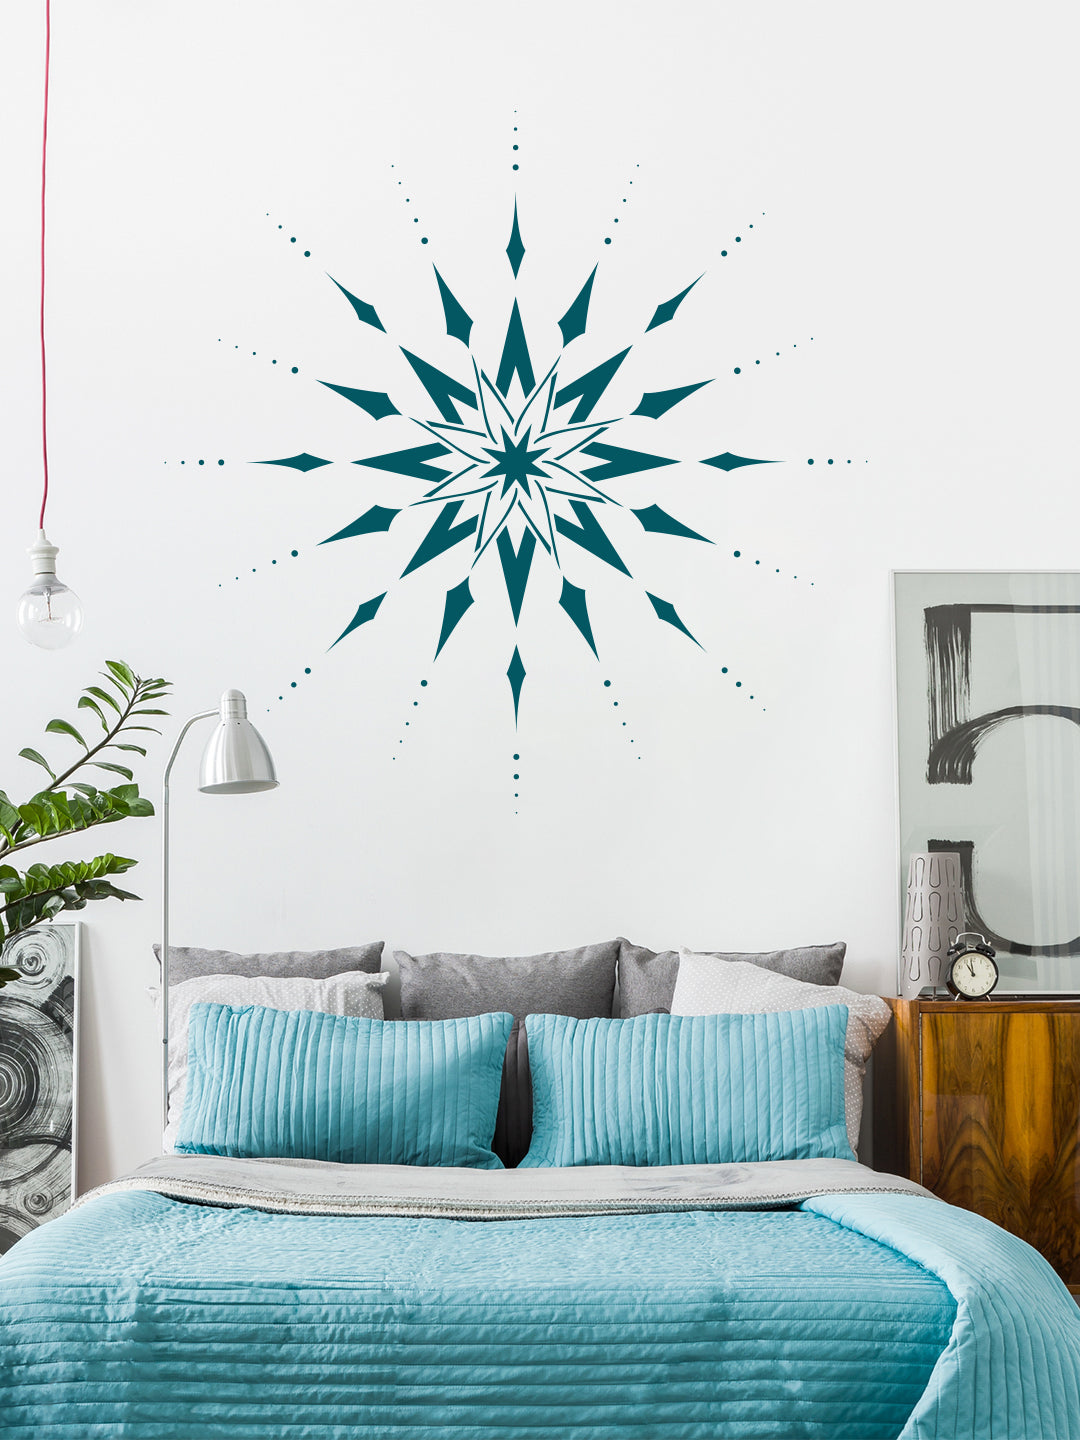 Kayra Decor Starburst Design Stencil for Wall Painting (KDMD1434-2424)